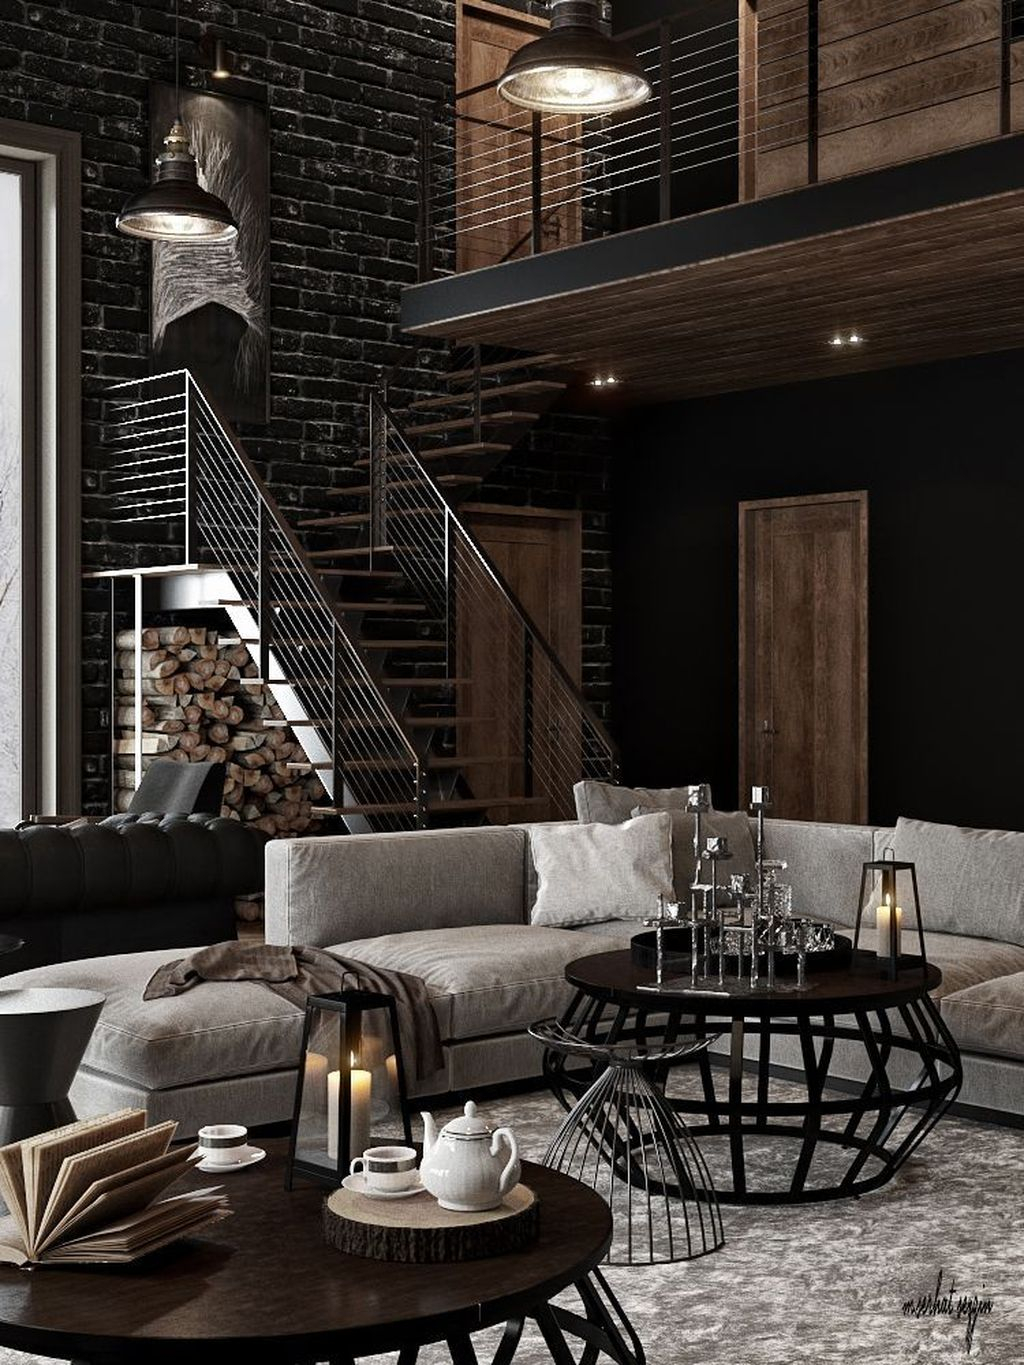 The Best Decorations Industrial Style Living Room That Will Amaze Your Guests42